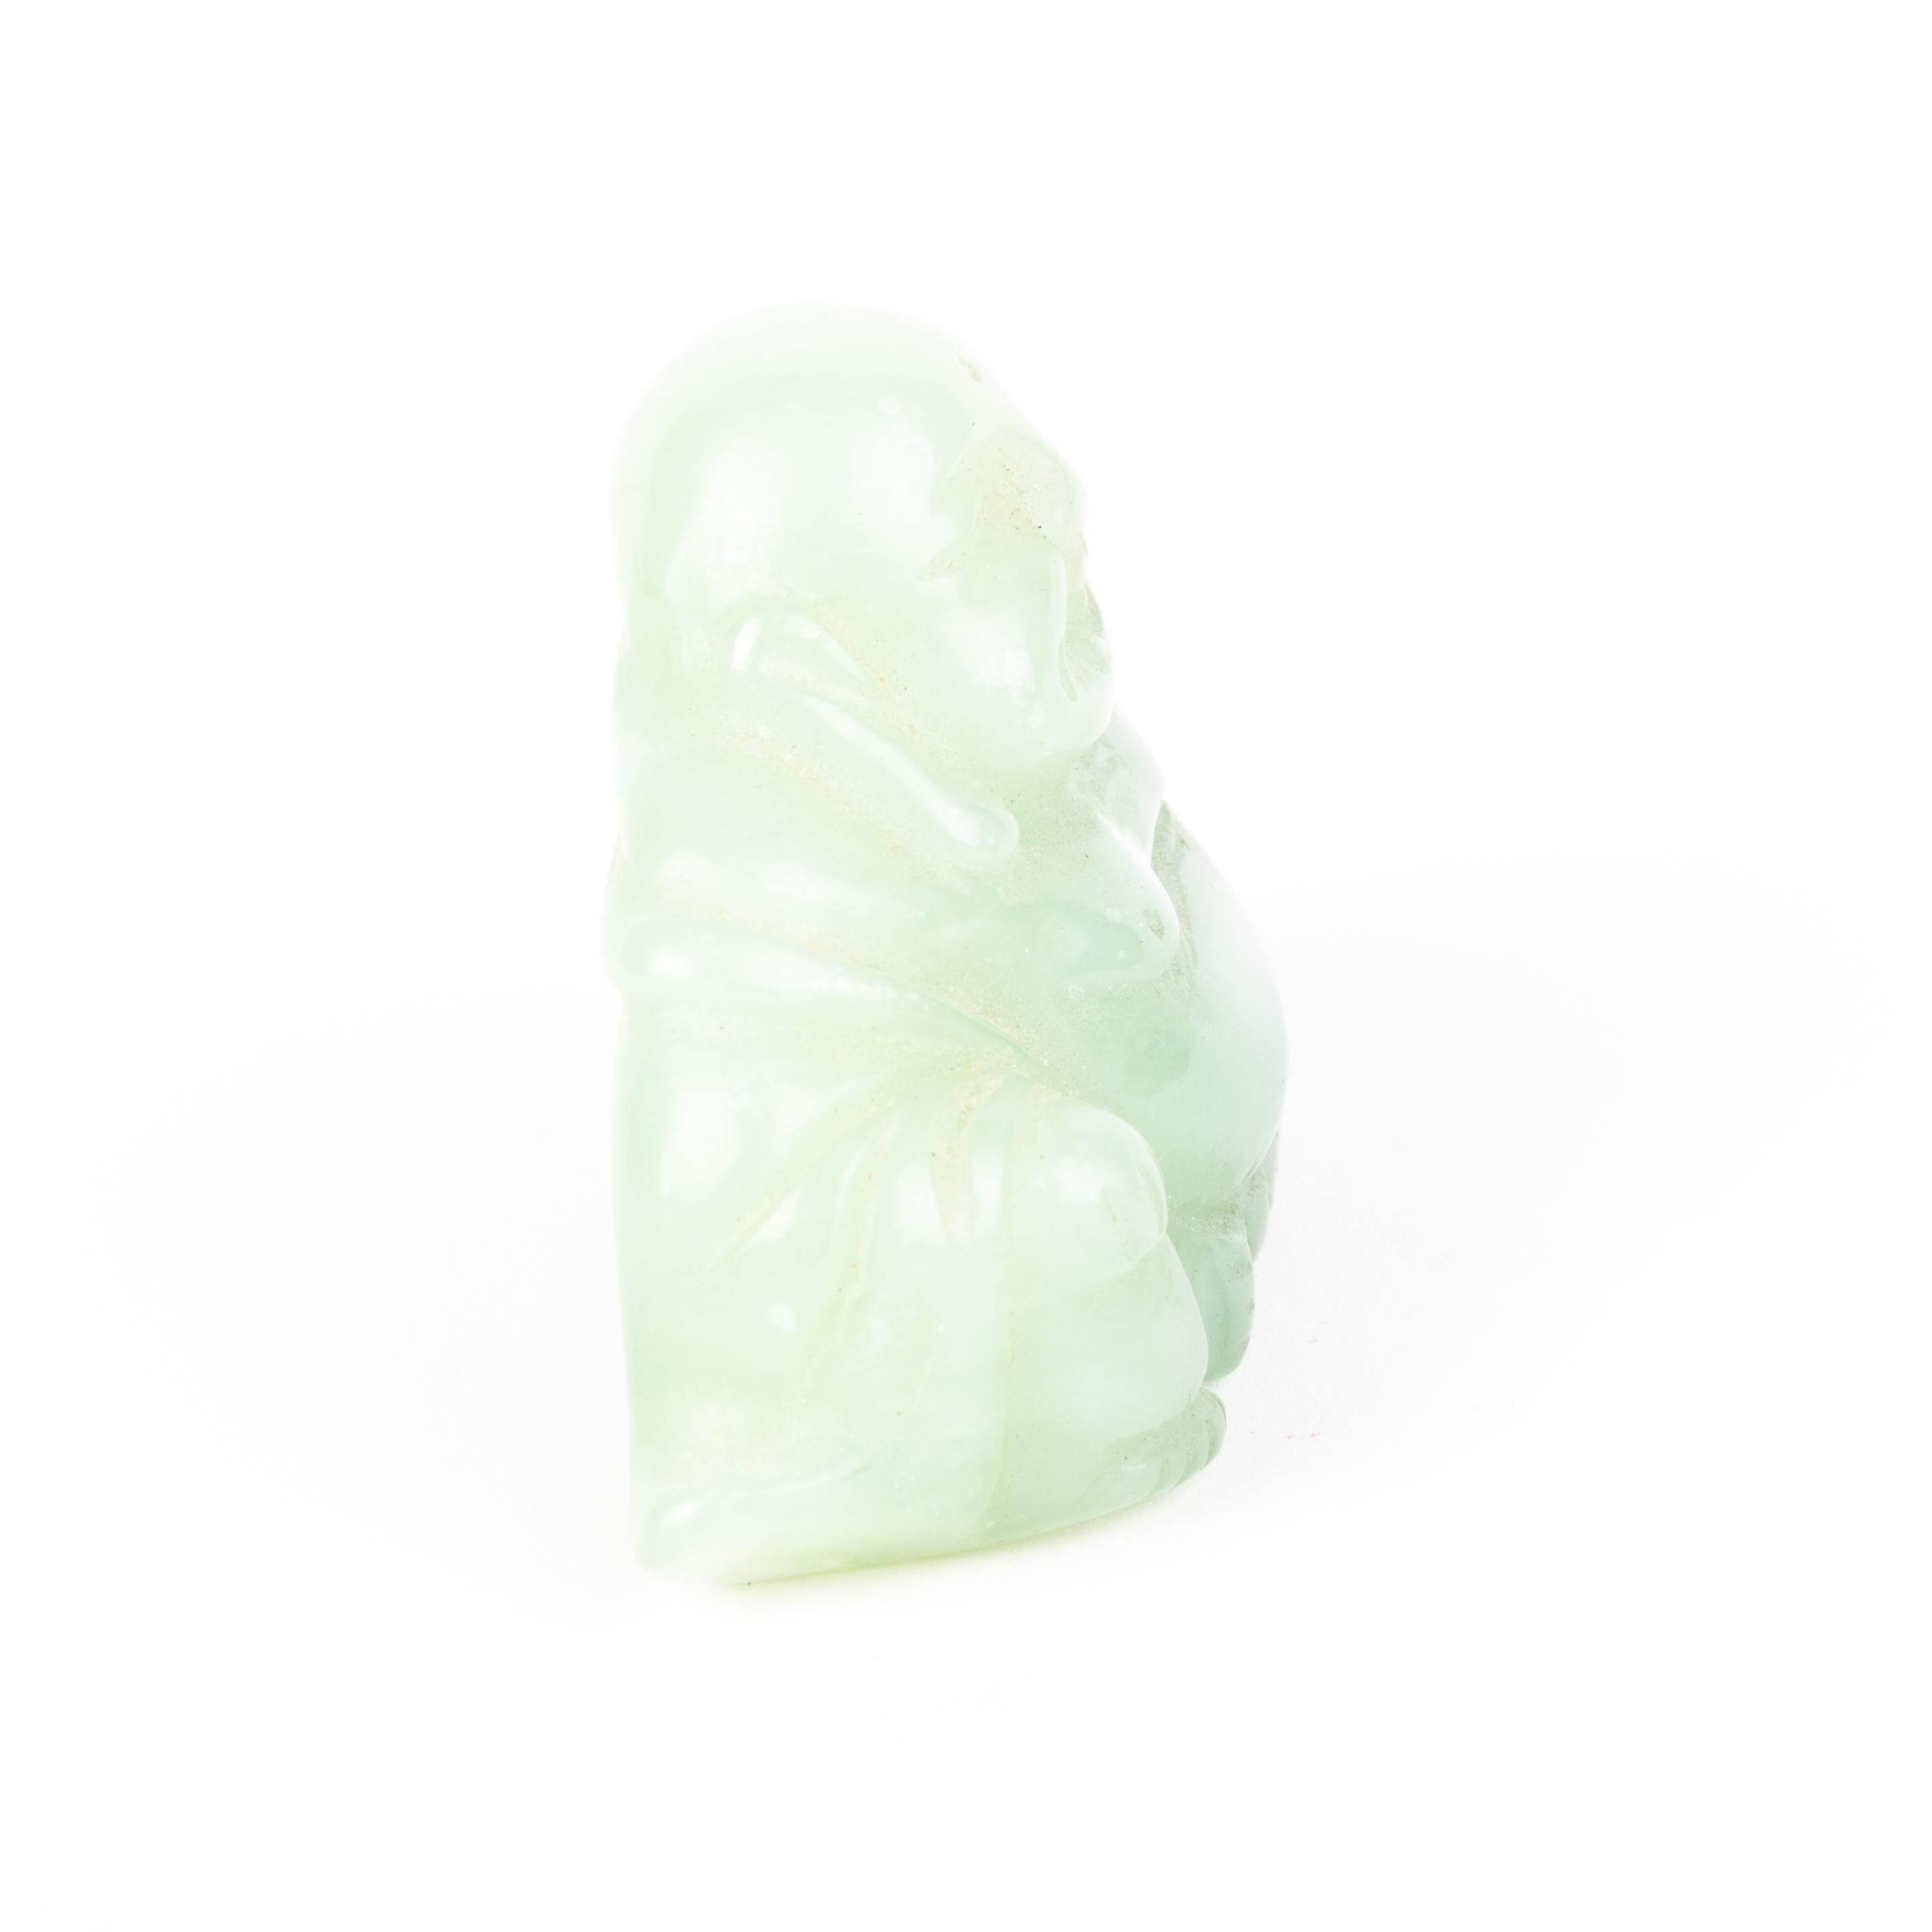 A finely carved Chinese jade sculpture of Buddha.
1820 to 1880 China, Qing Dynasty.
Very good condition.
From a private collection.
Free international shipping.